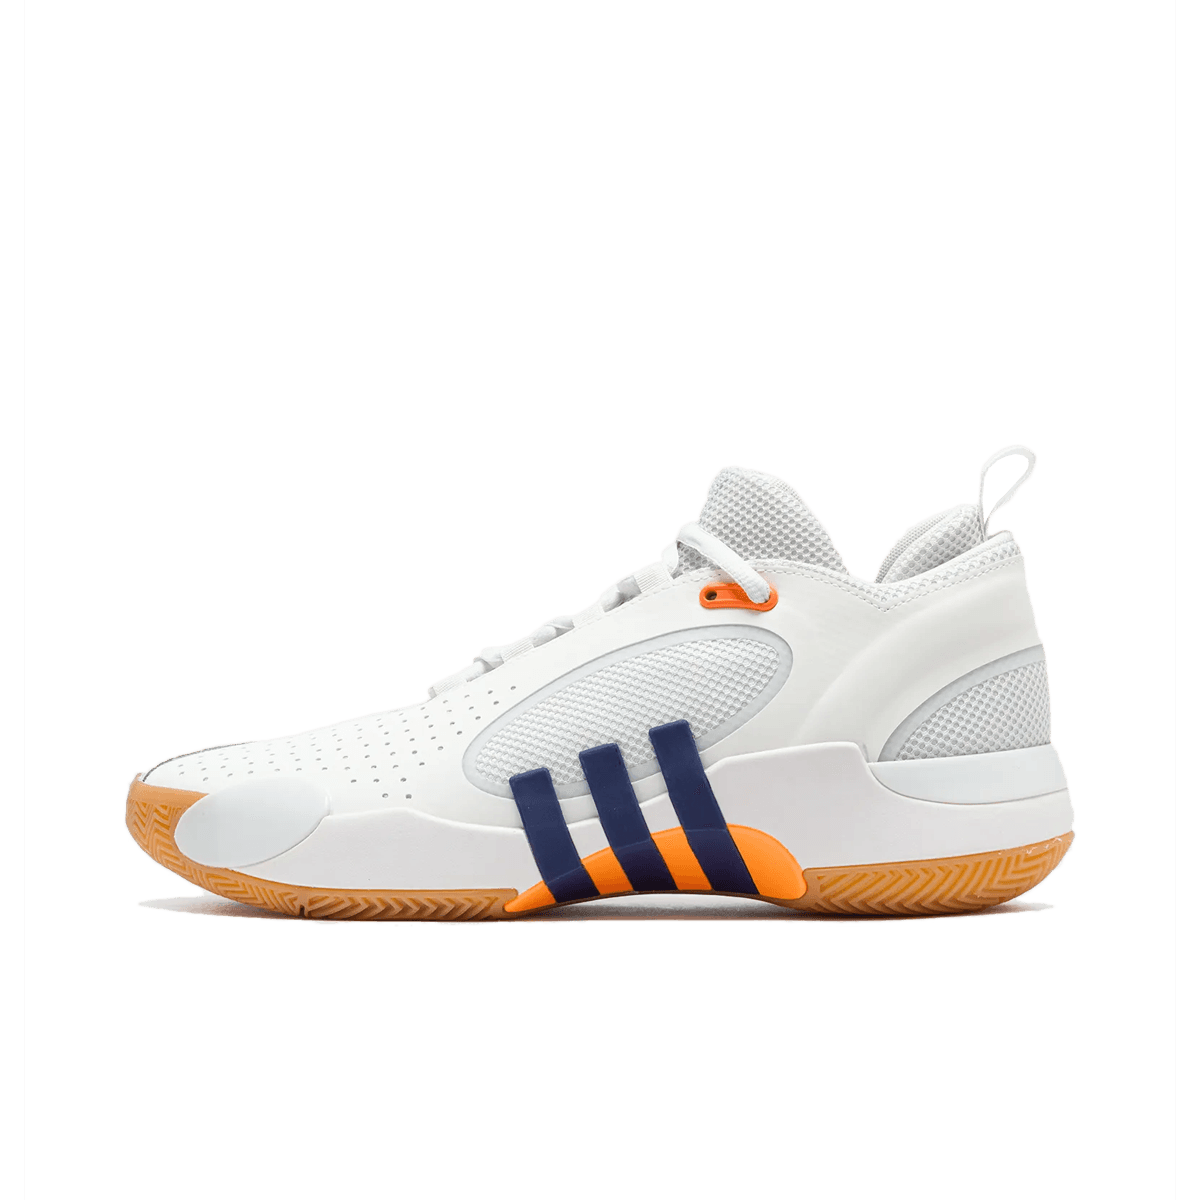 adidas D.O.N. Issue 5 'White Victory Blue'